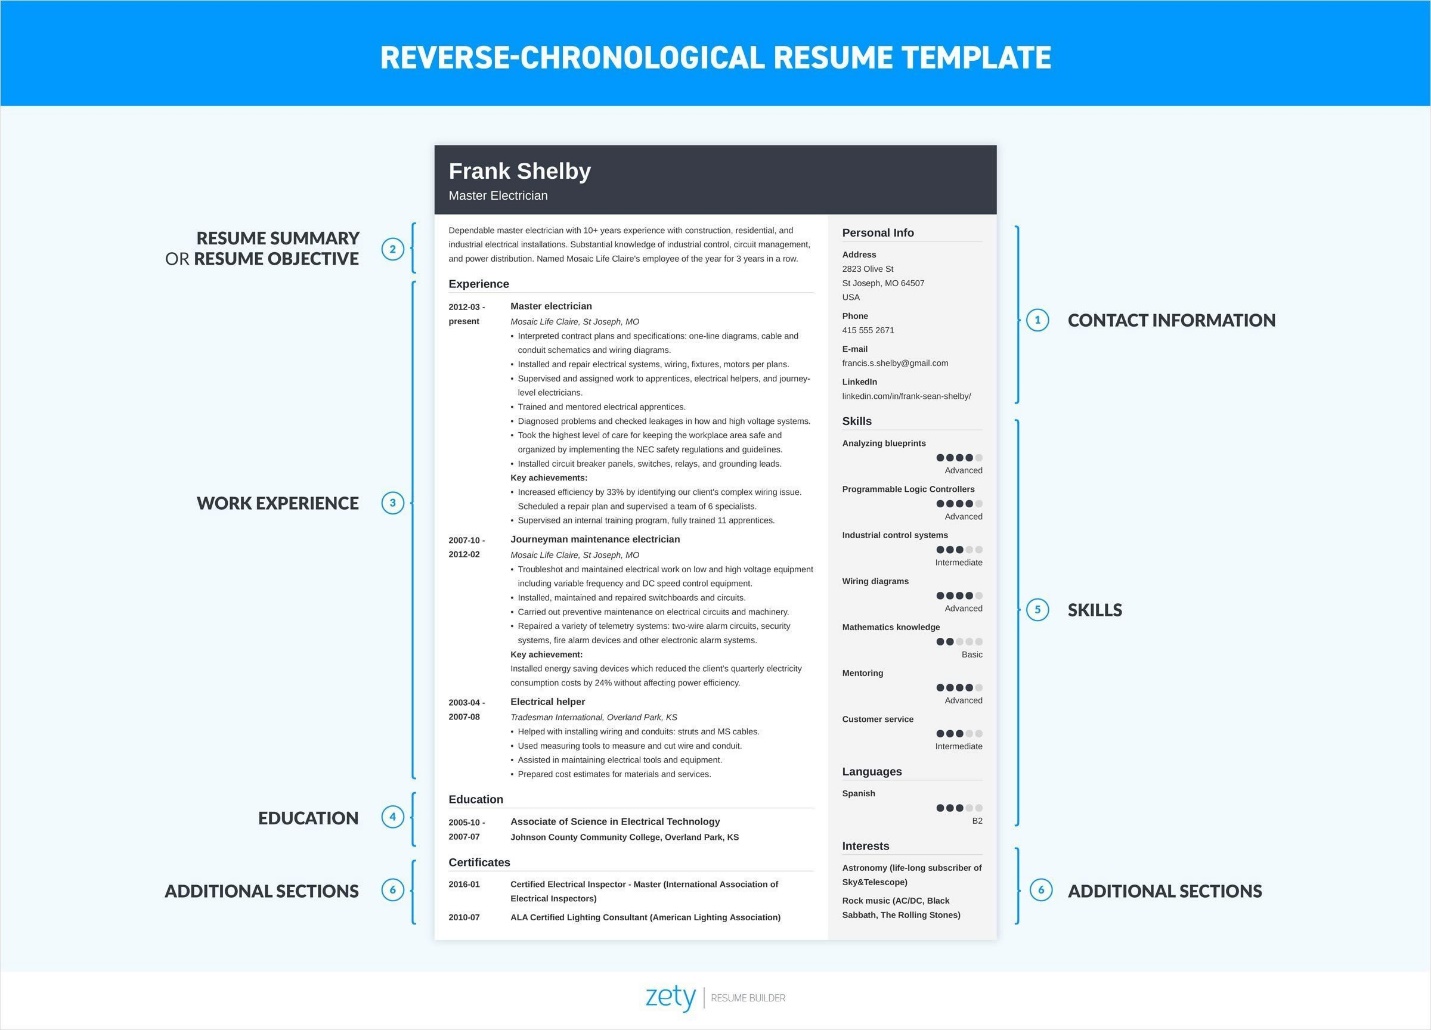 What Does the Best Resume Look Like in 2021